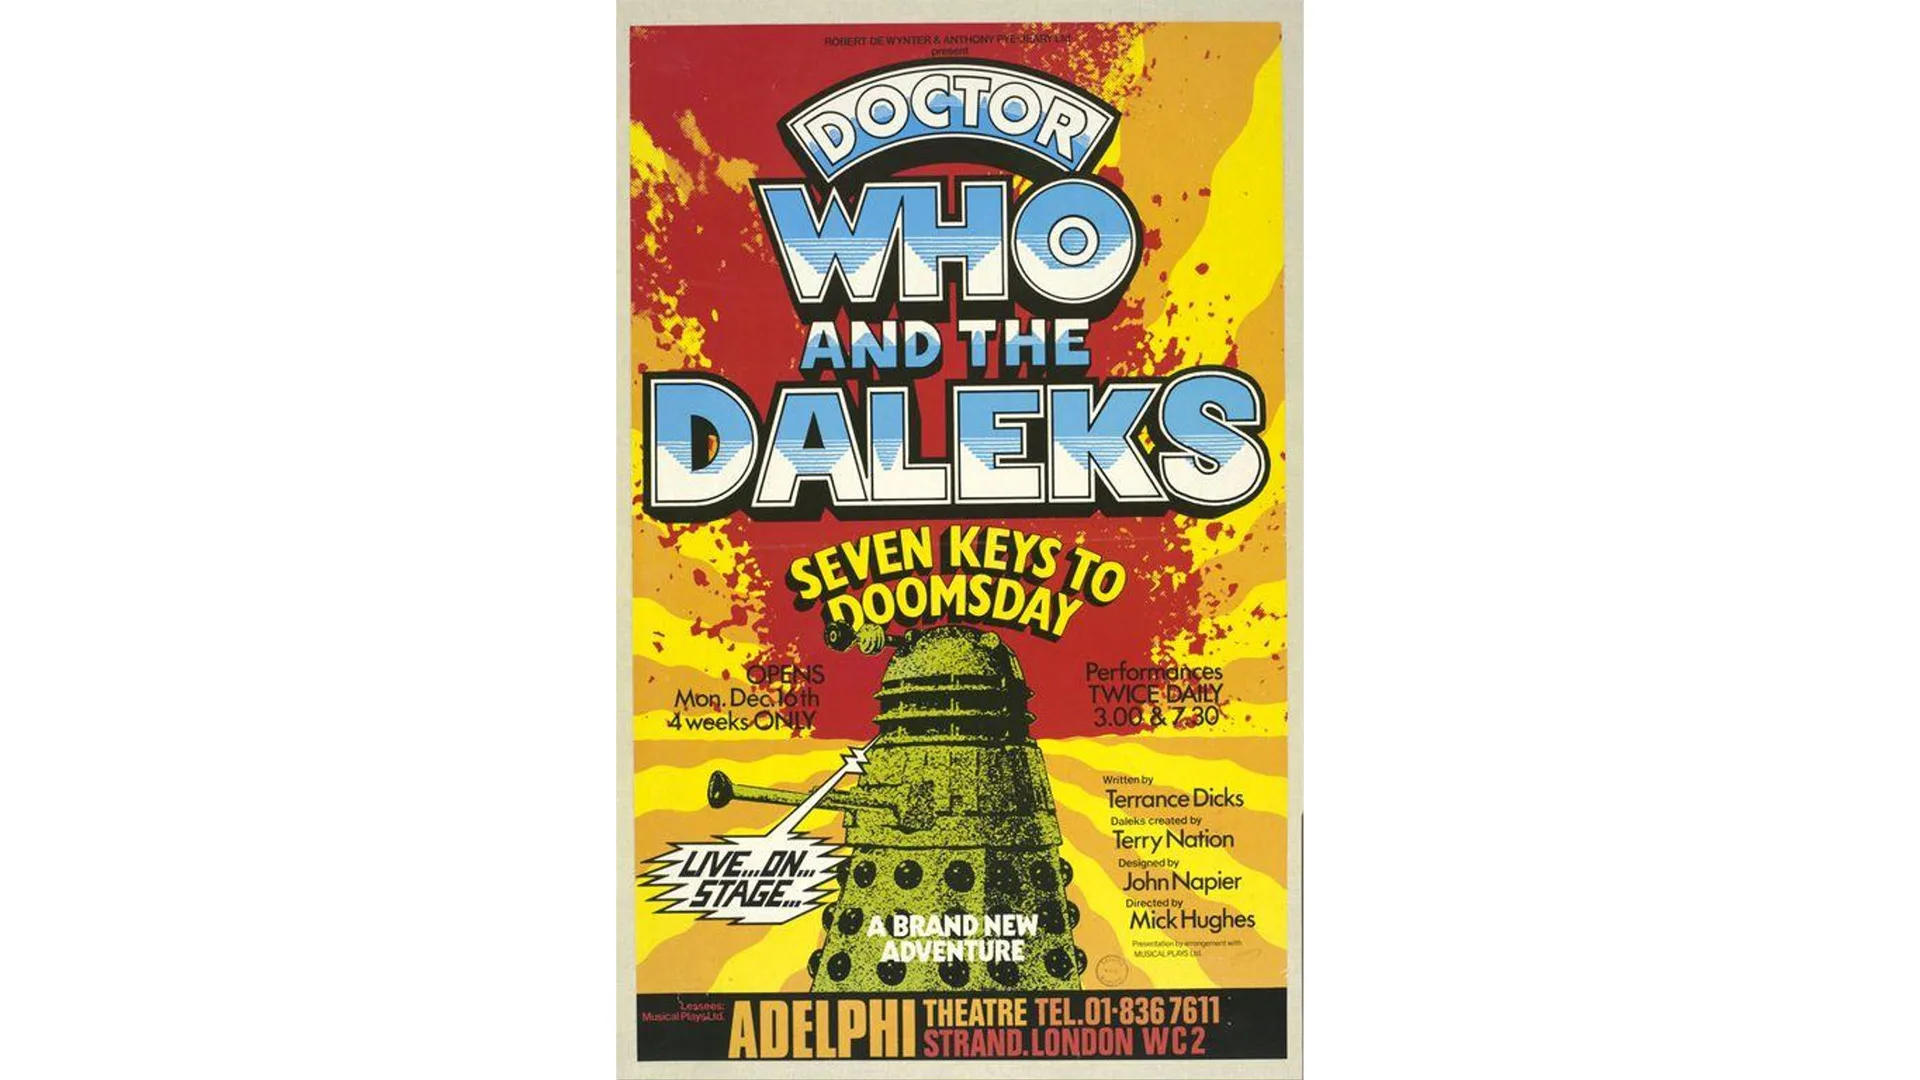 Doctor Who poster with yellow and red background and a dalek